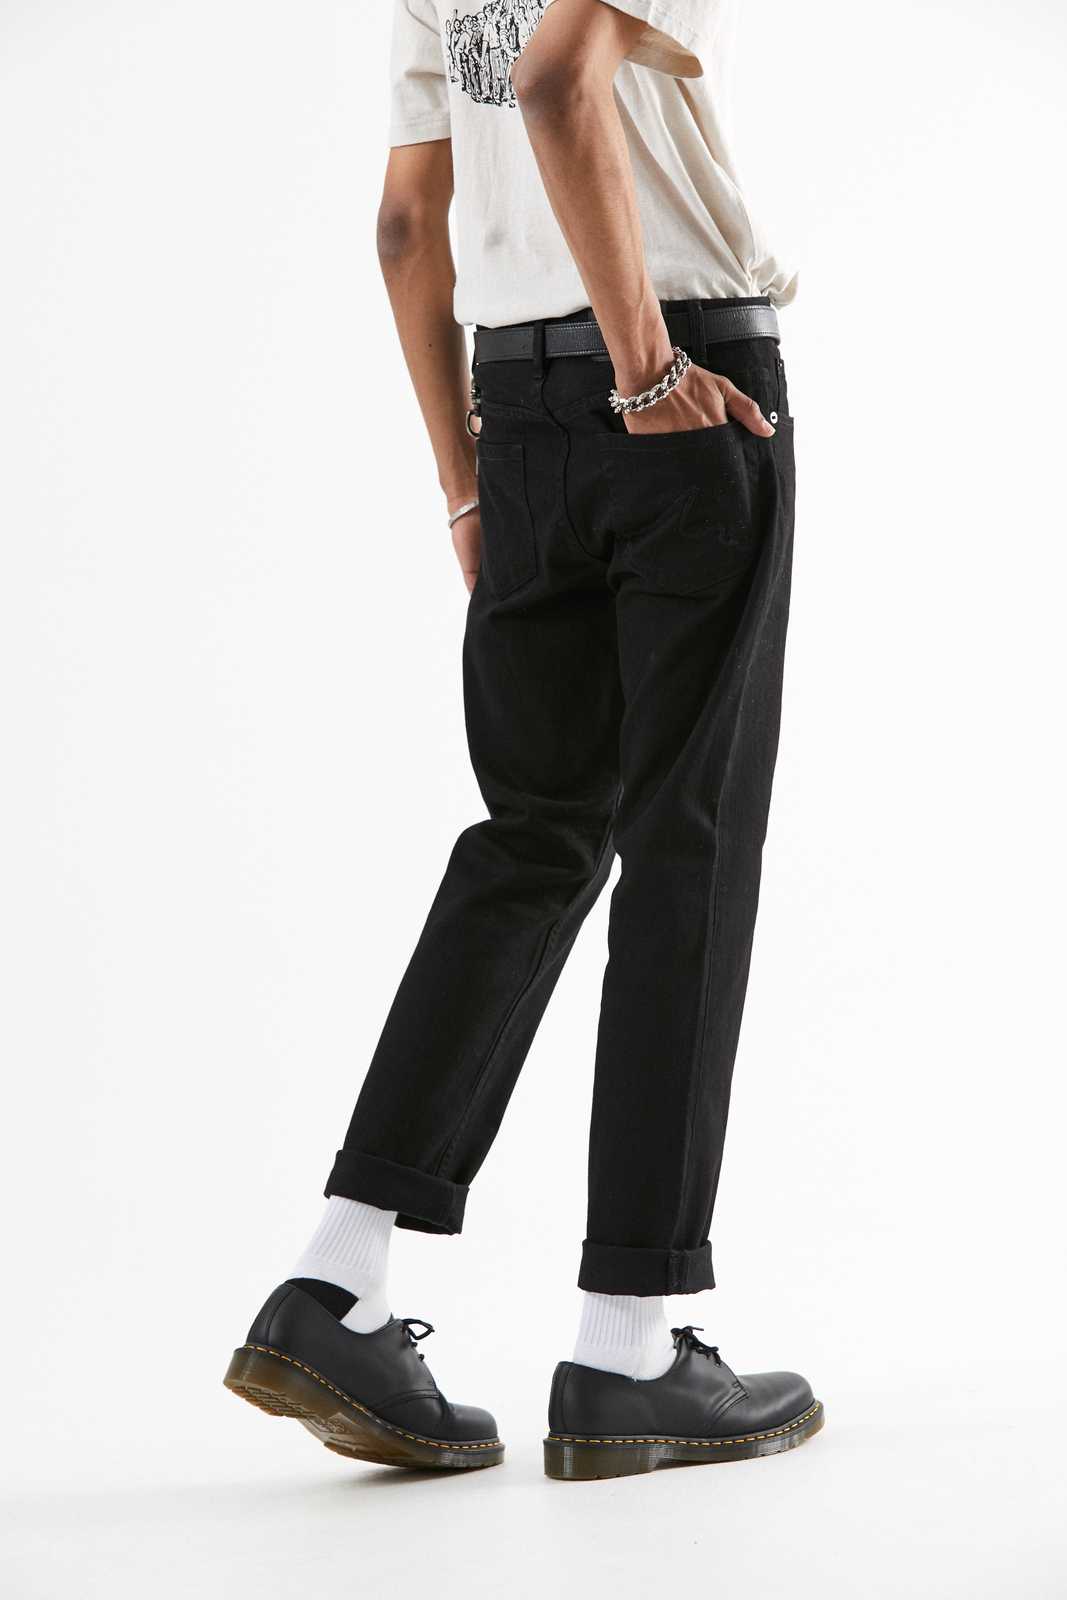 Ninety Twos - Hemp Relaxed Fit Chino Pant